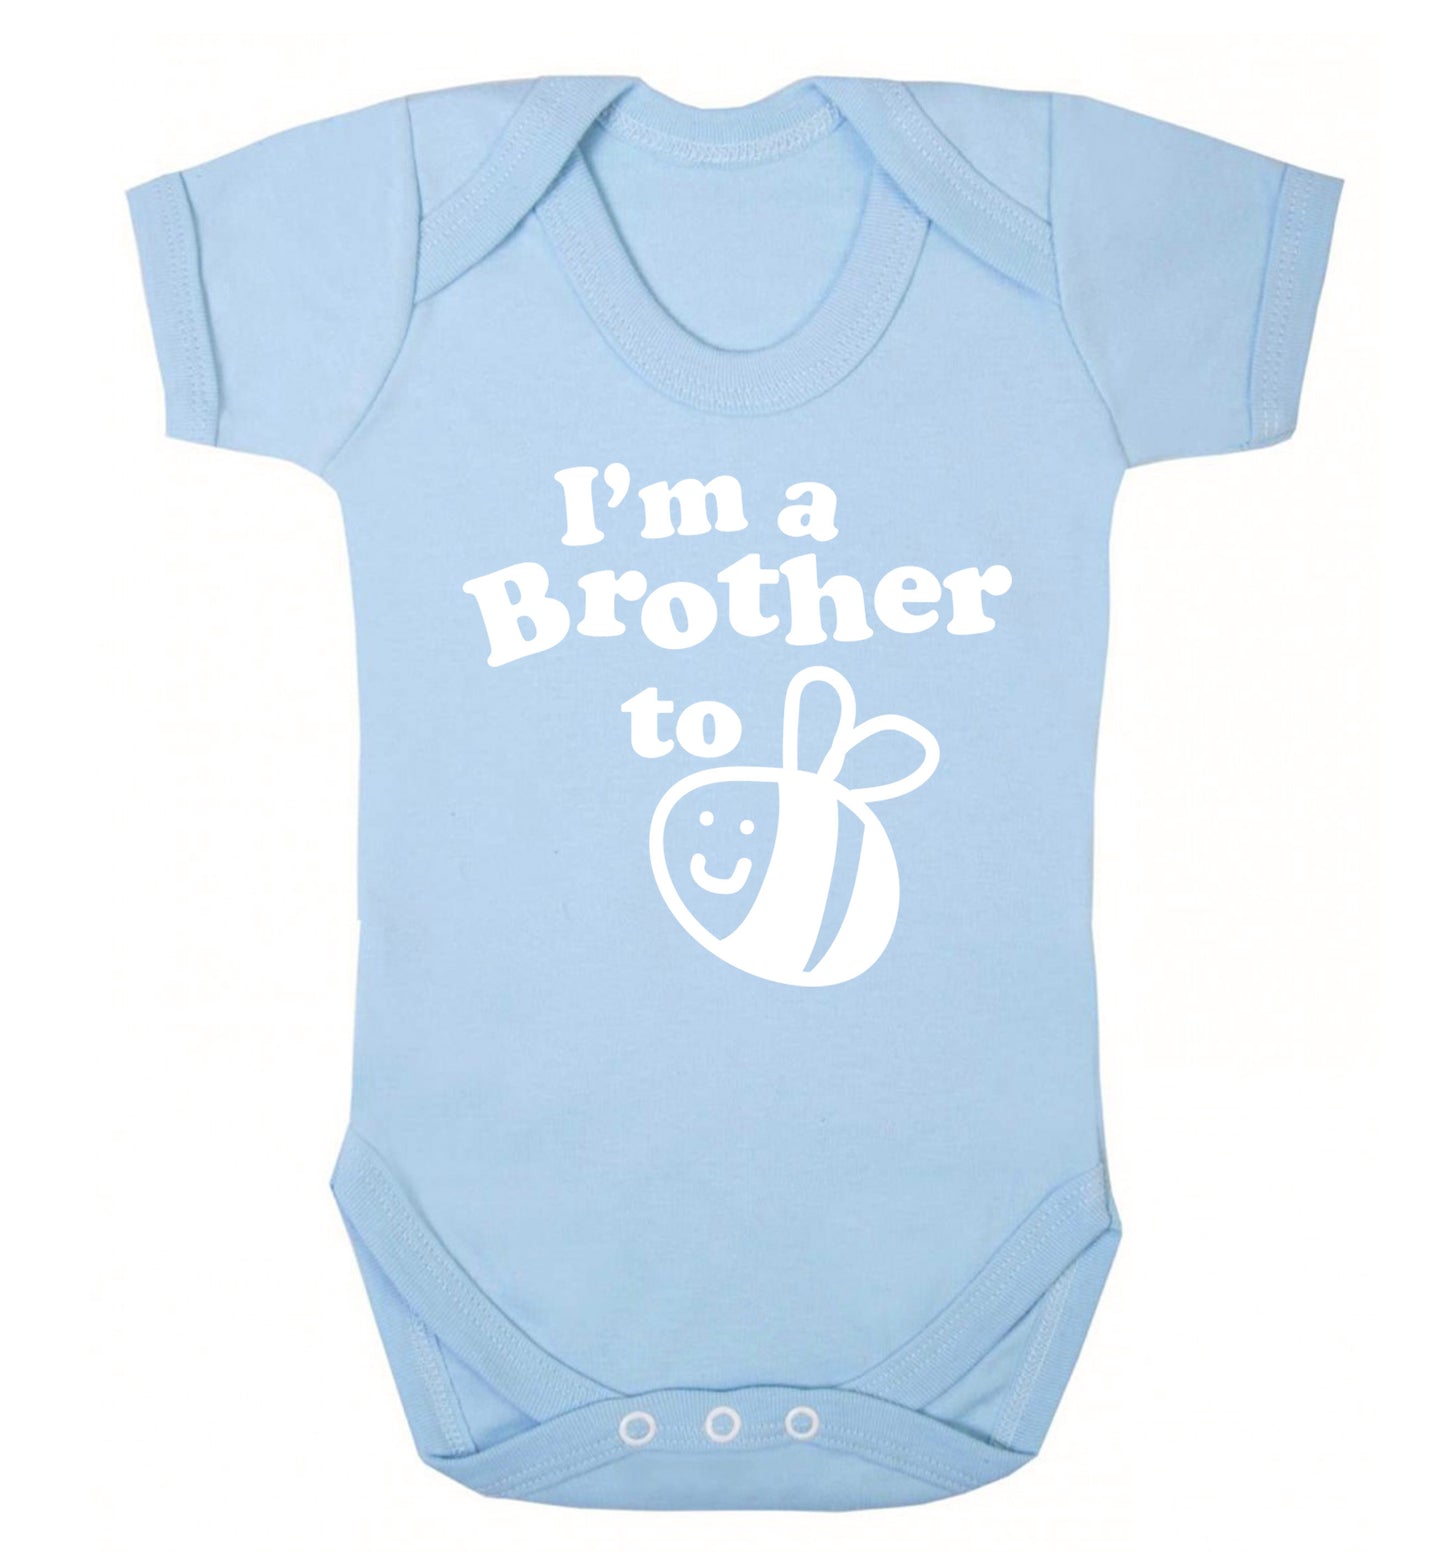 I'm a brother to be Baby Vest pale blue 18-24 months